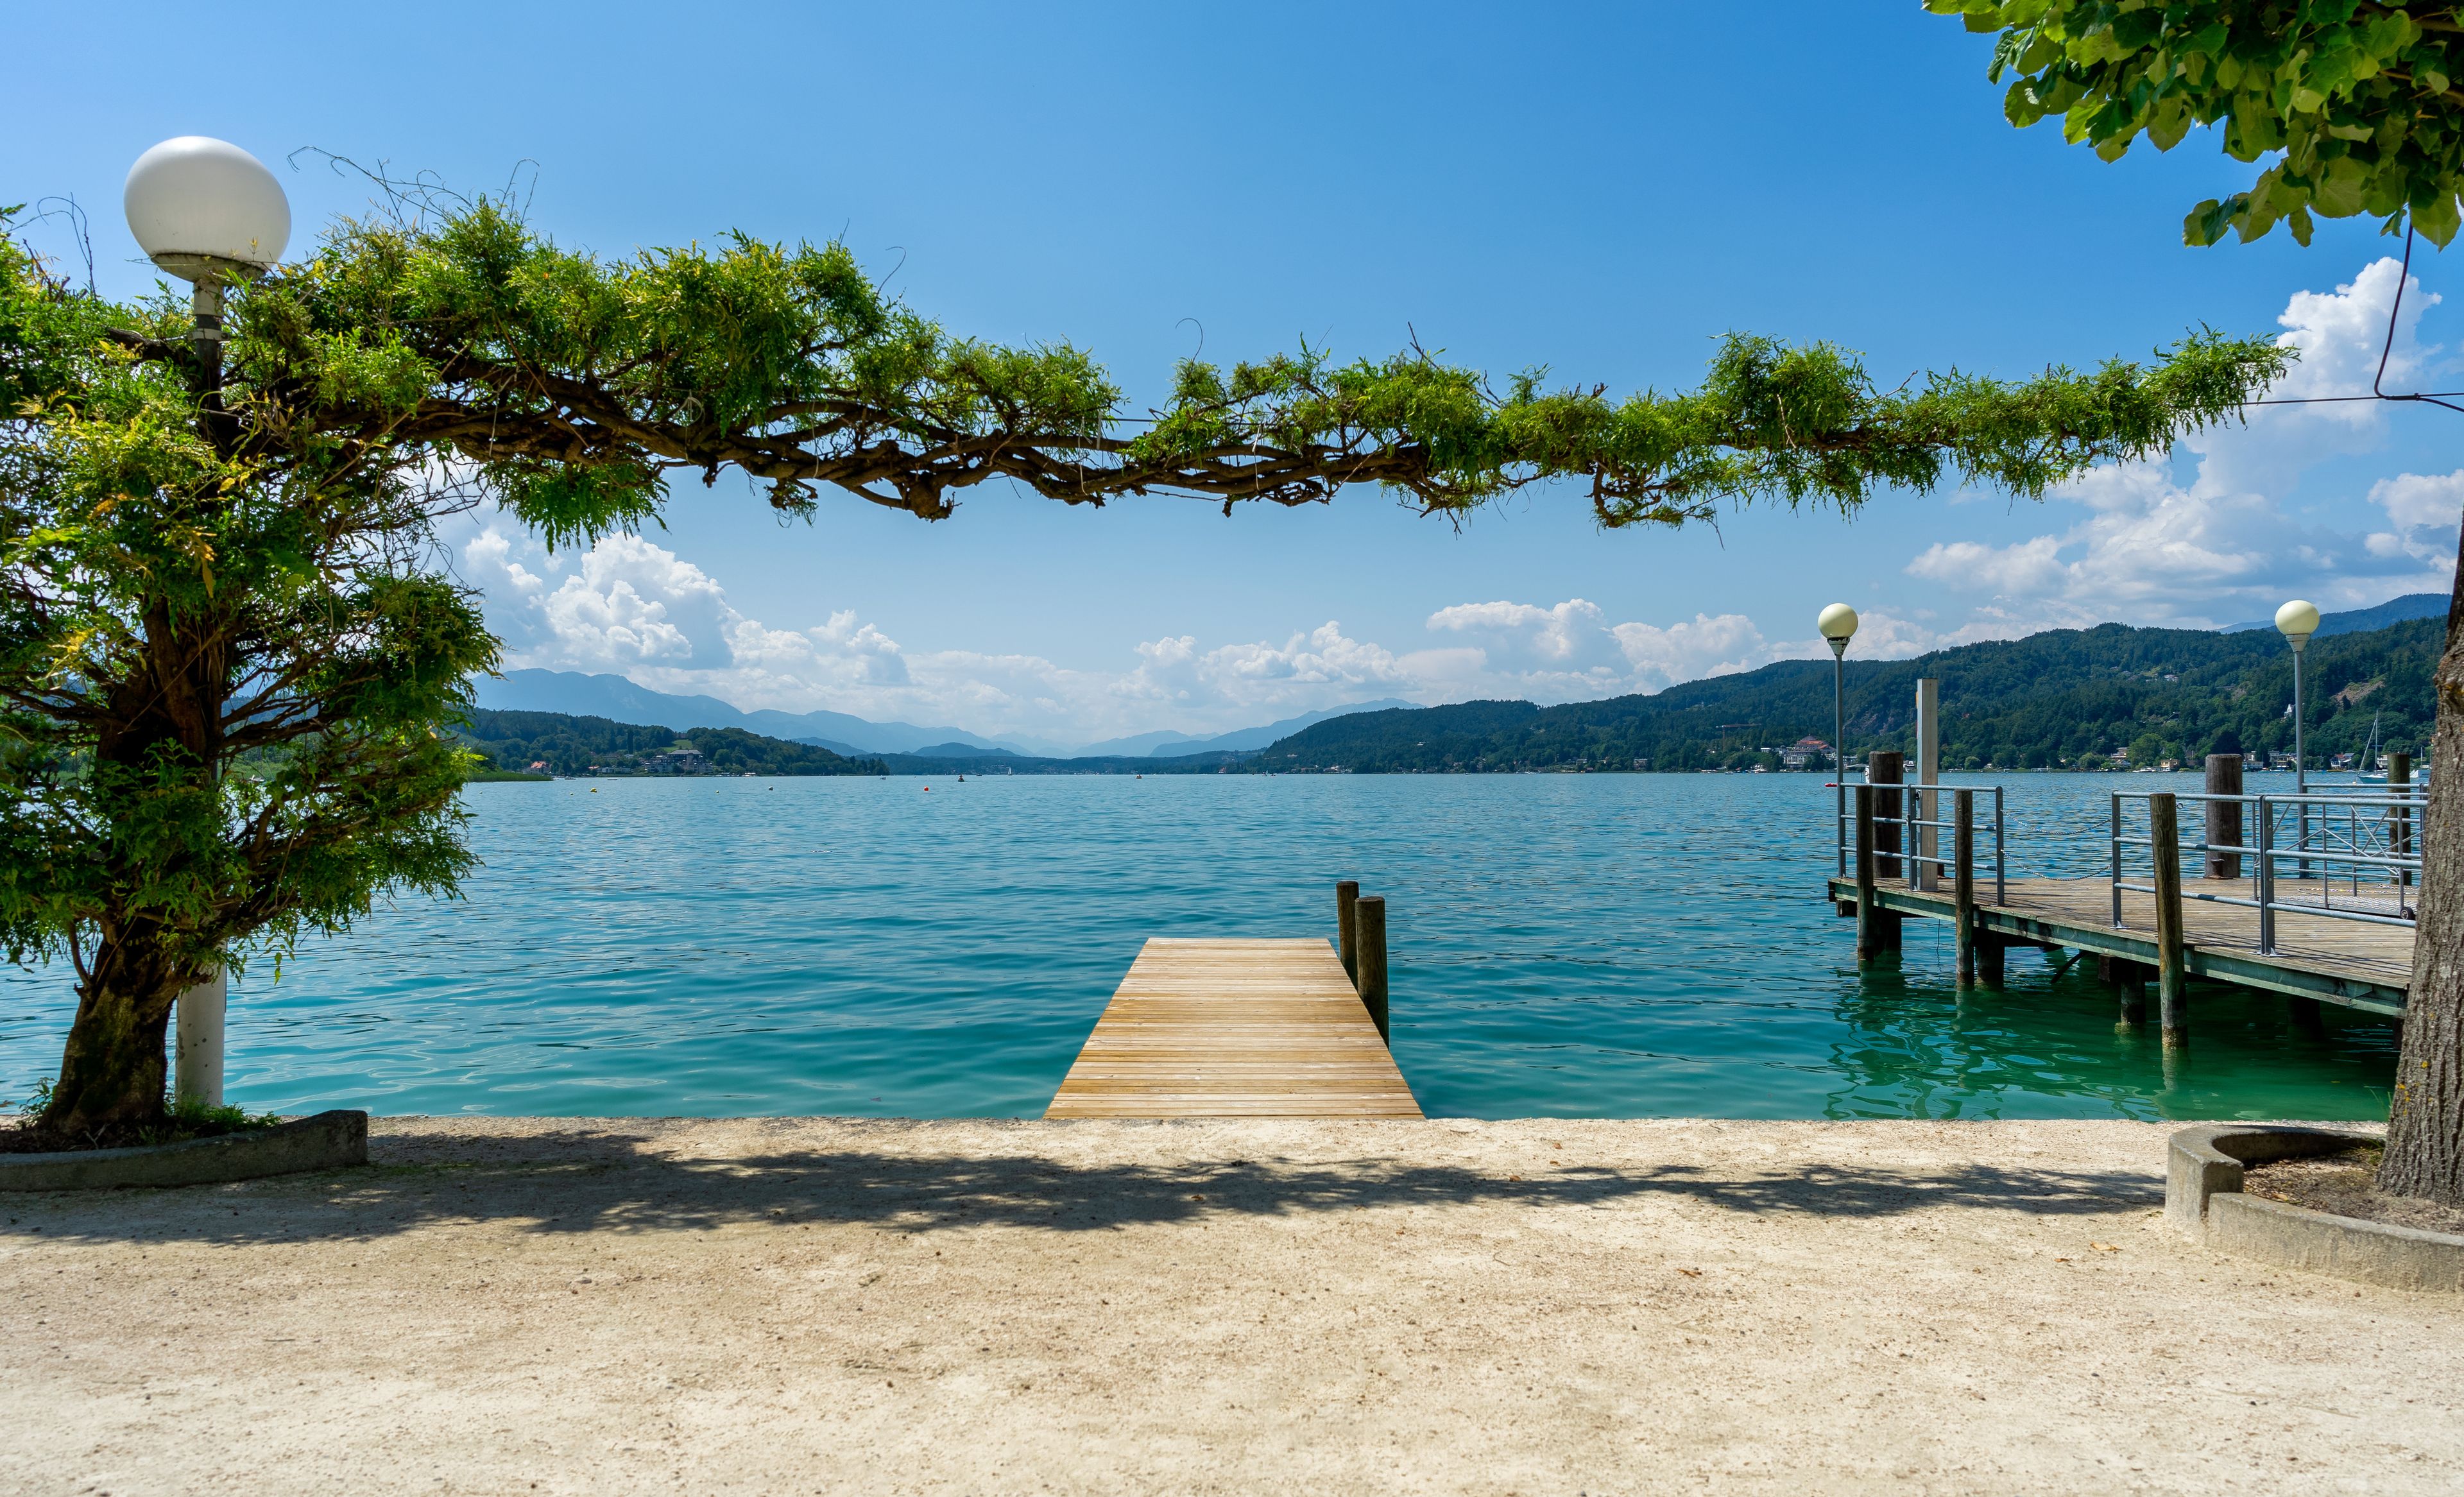 Woerthersee